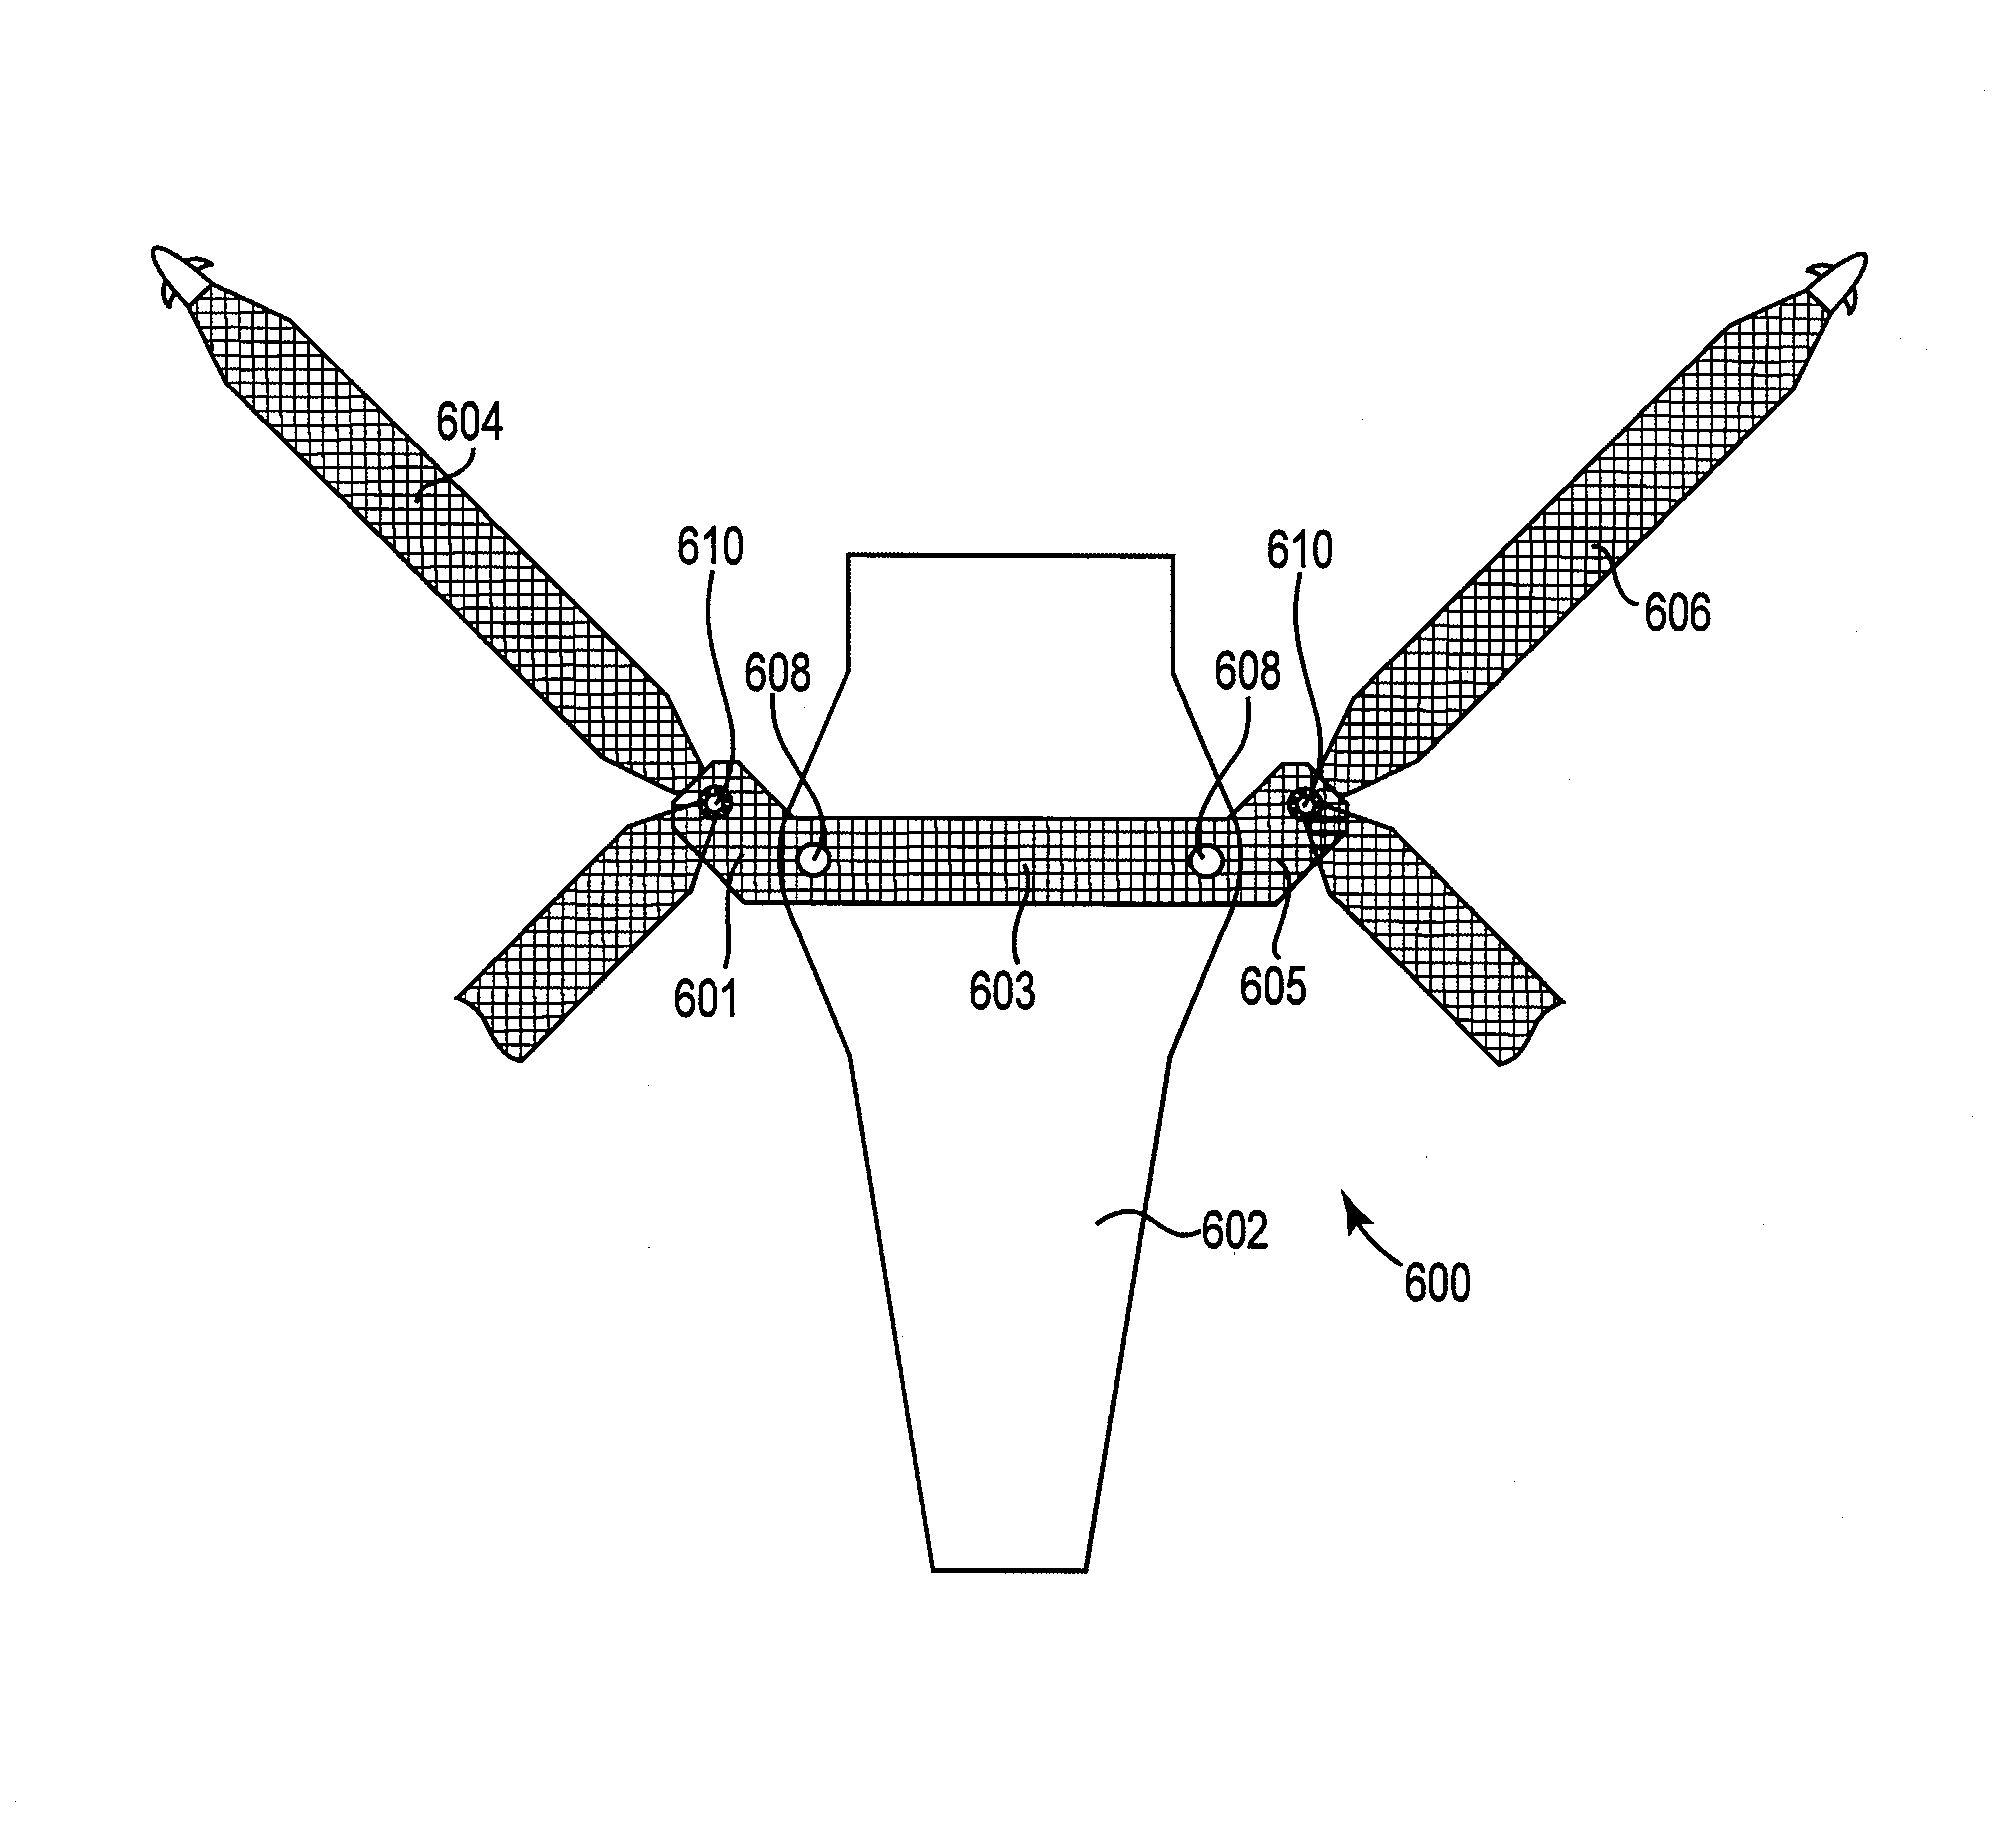 Implants, tools, and methods for treatment of pelvic conditions